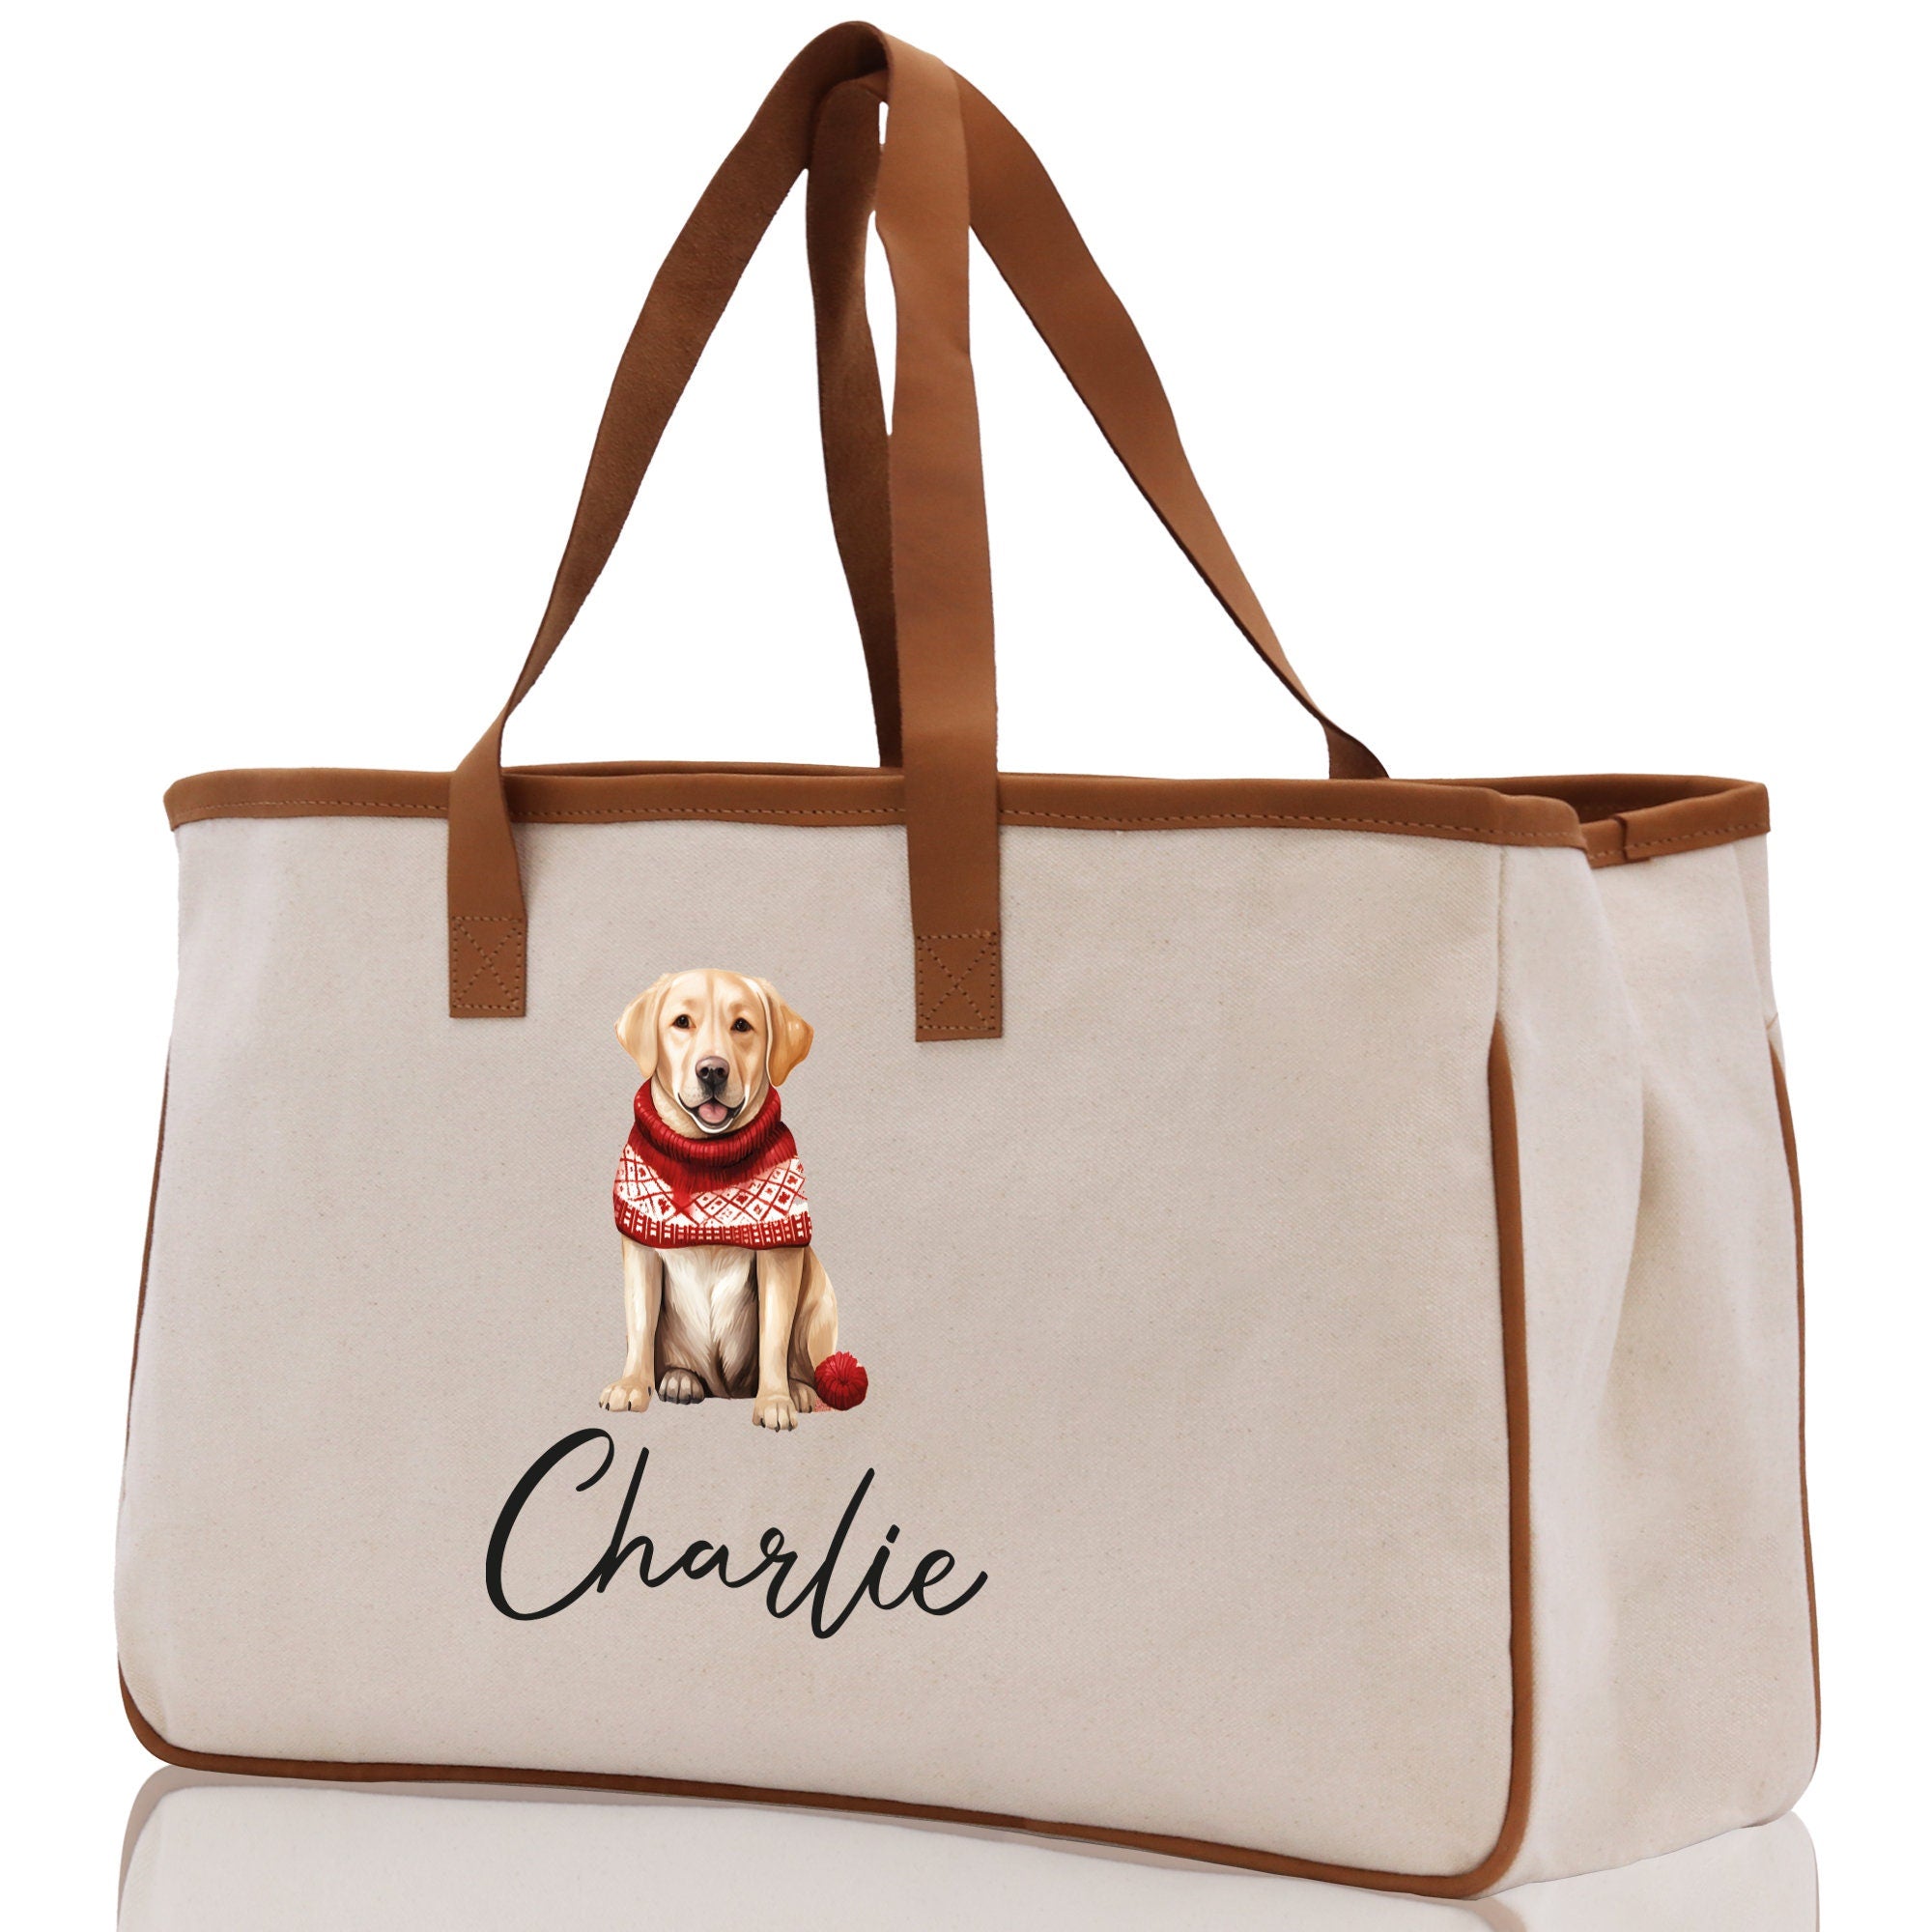 a canvas bag with a dog wearing a scarf